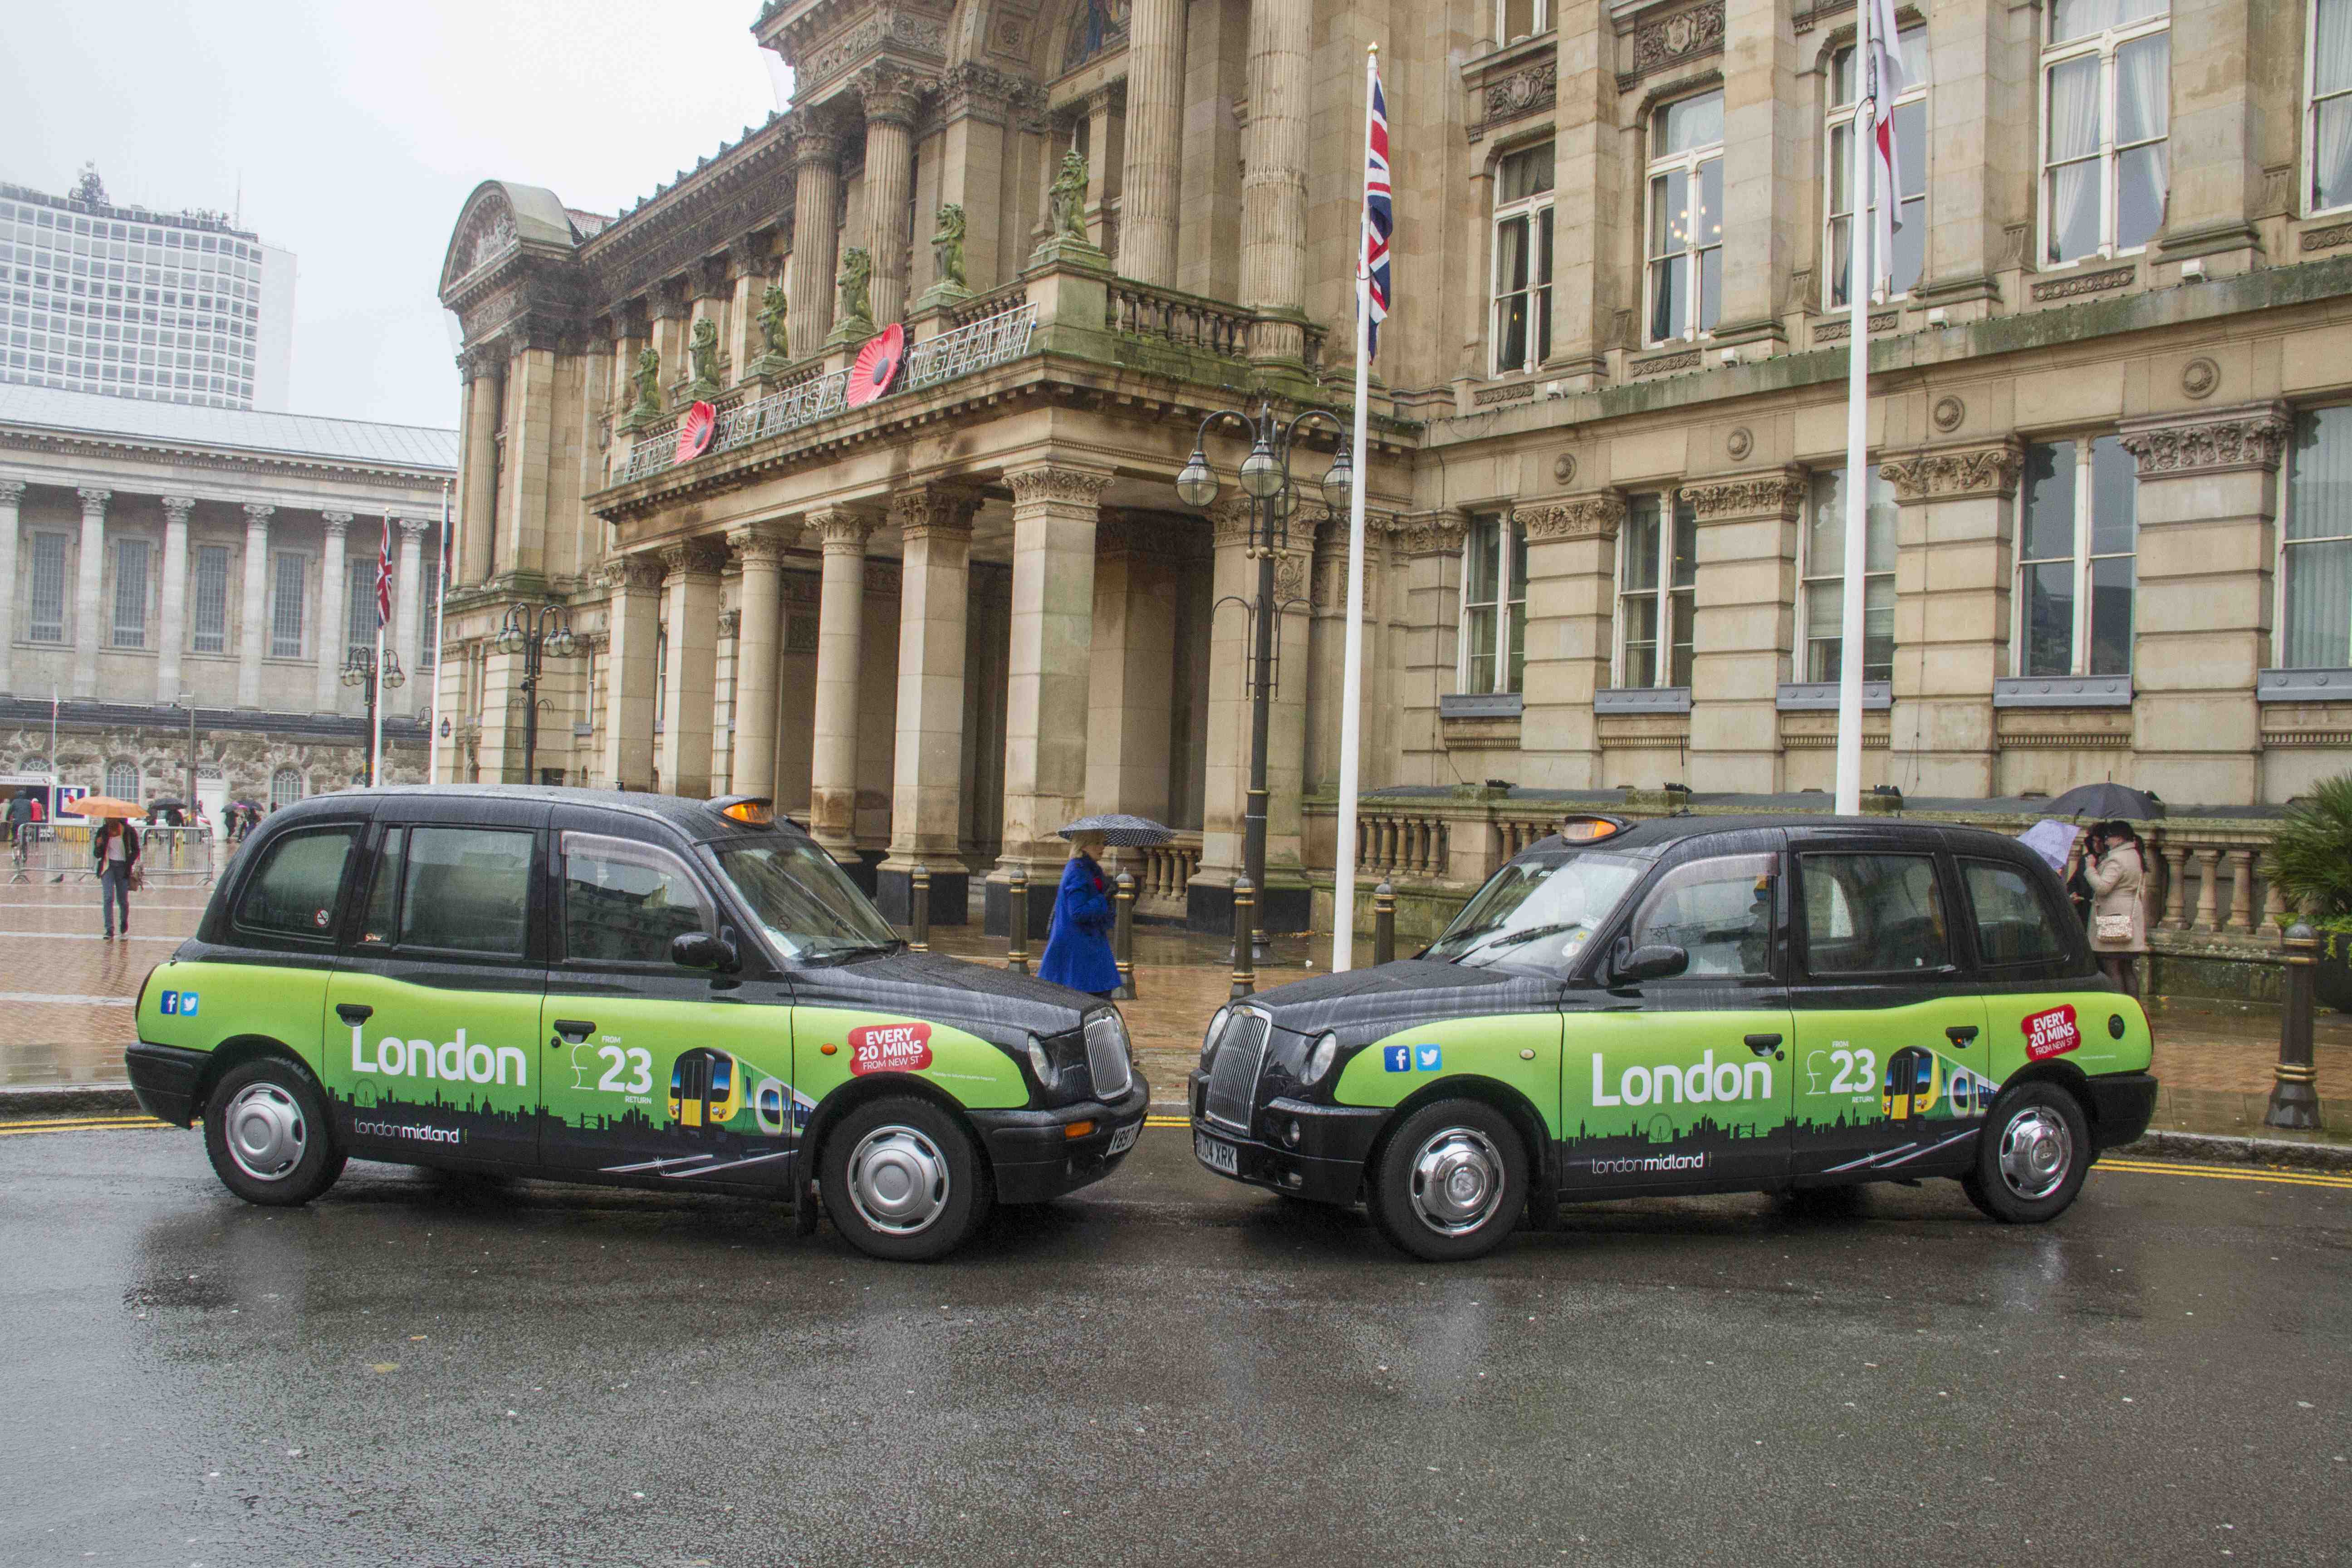 2013 Ubiquitous taxi advertising campaign for London Midland Trains - London from £23